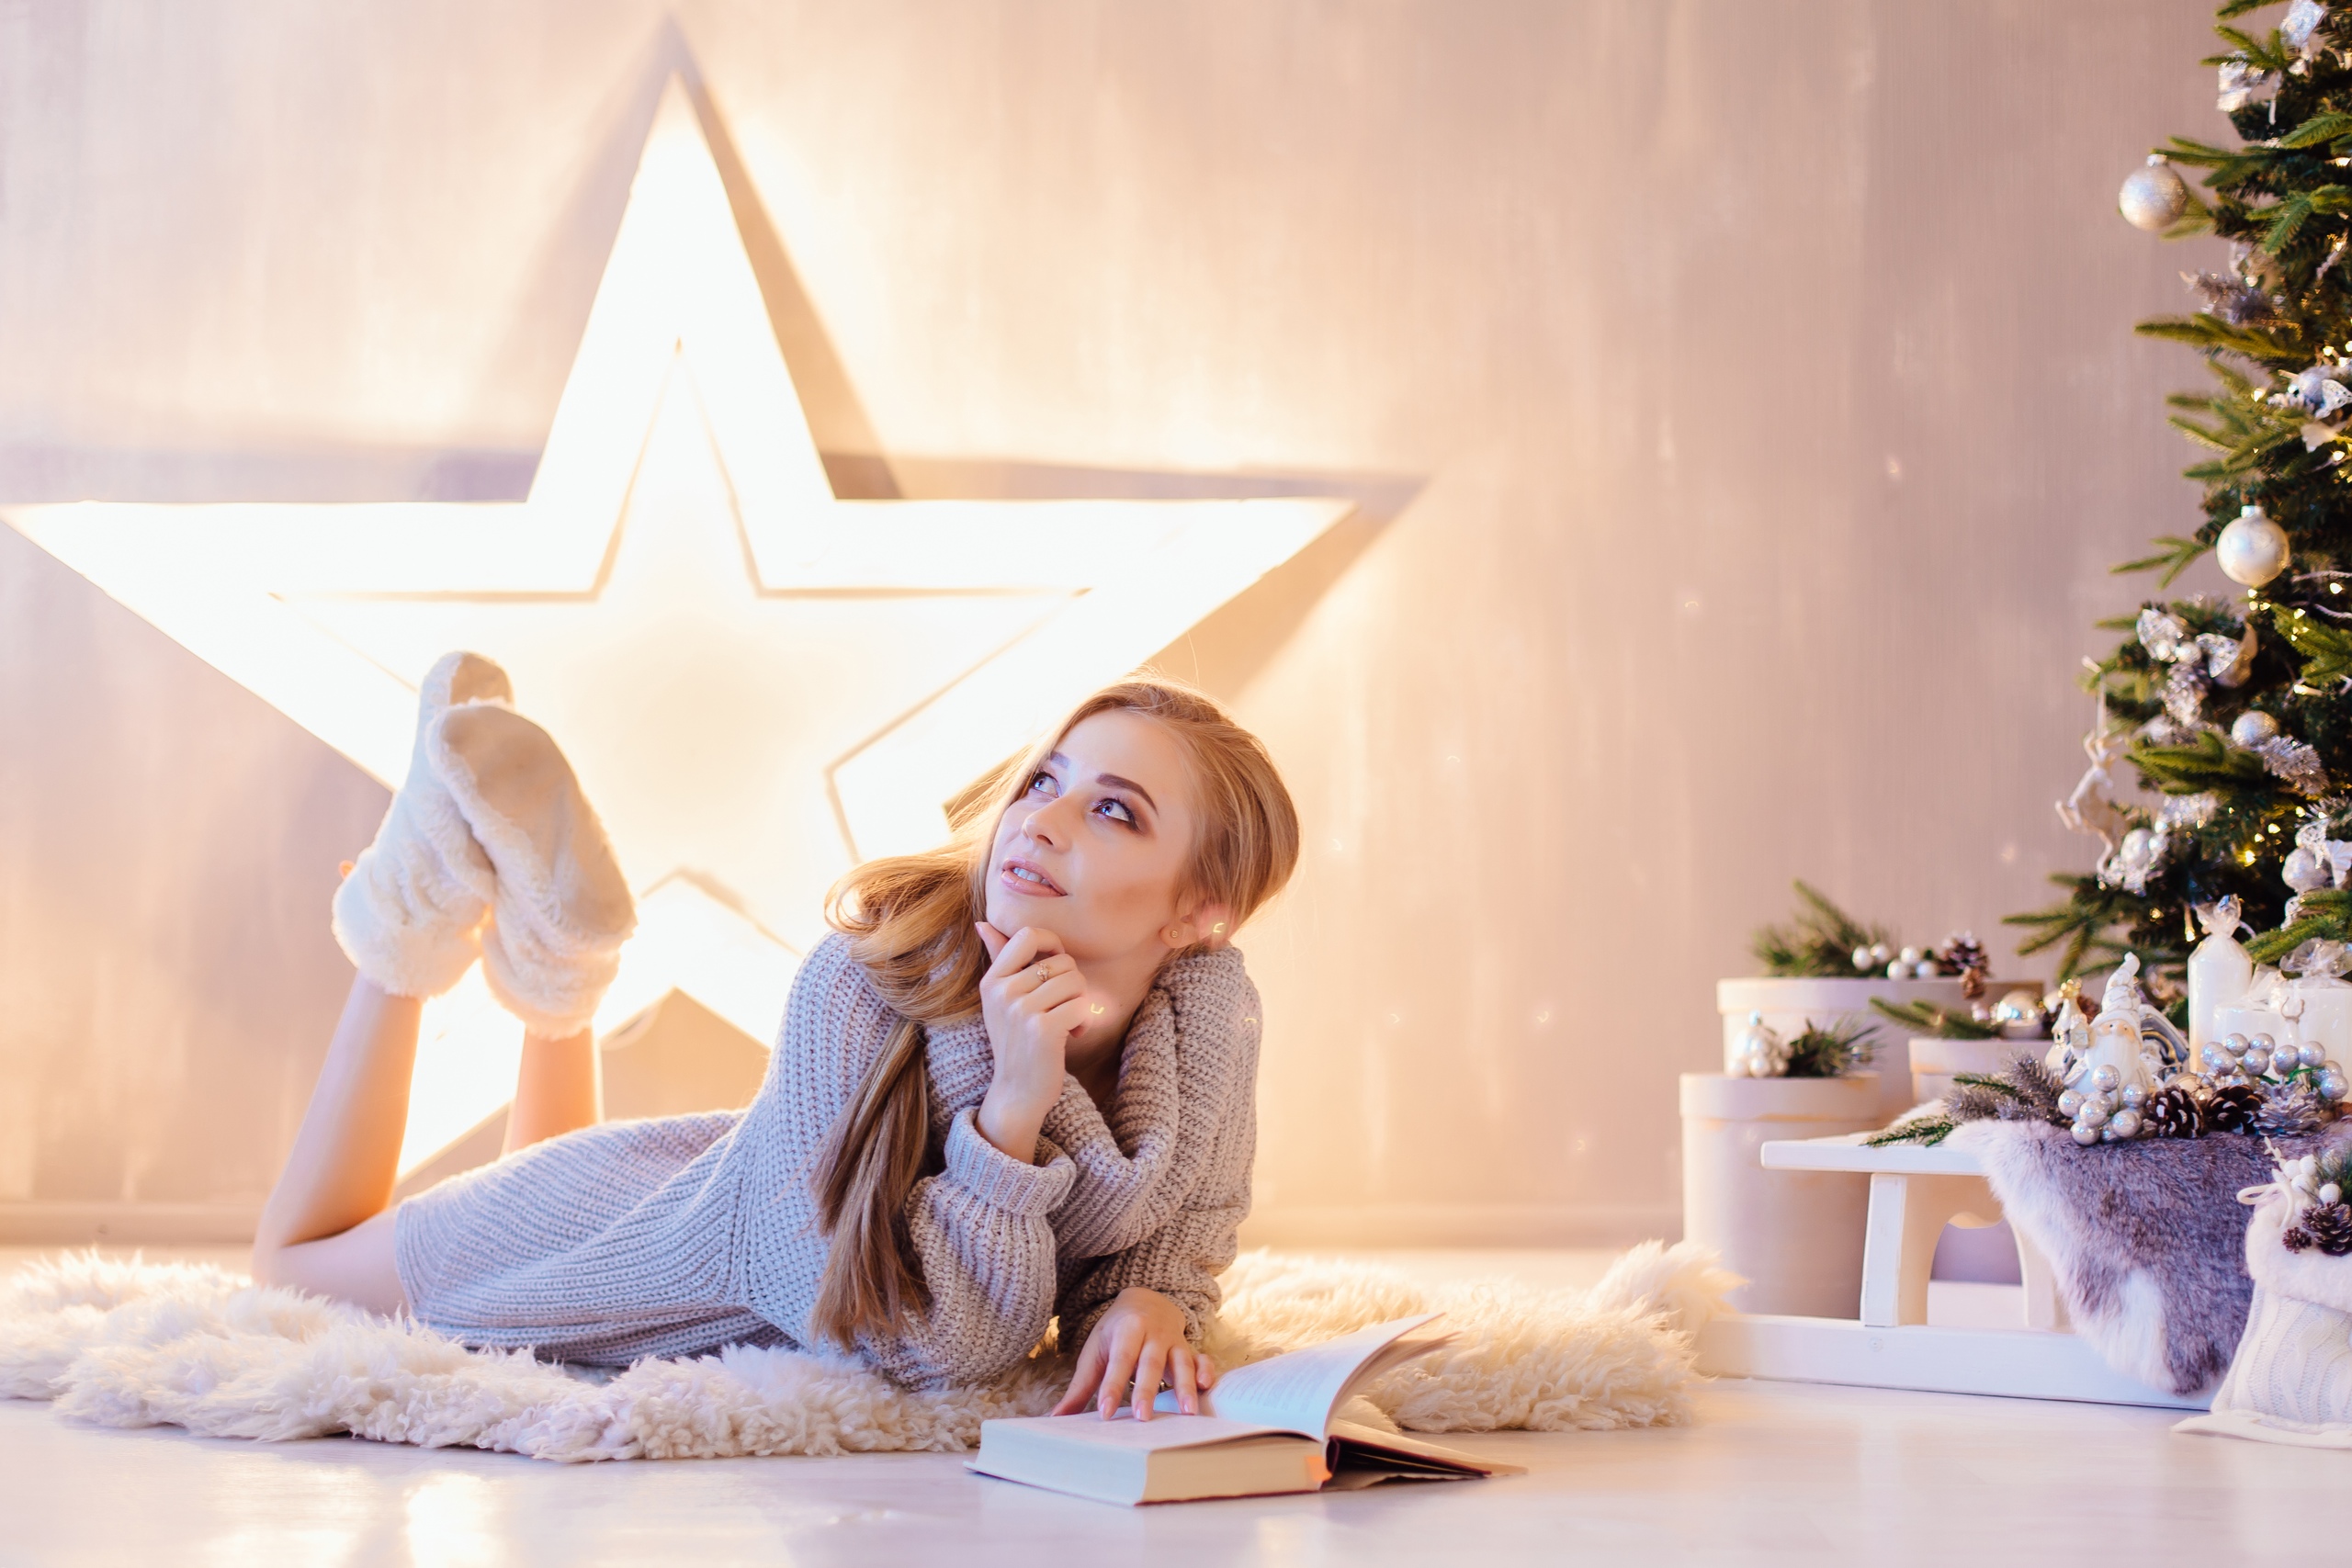 Women Model Blonde Long Hair Smiling Looking Up Sweater Sweater Dress On The Floor Carpets Slippers  2560x1707